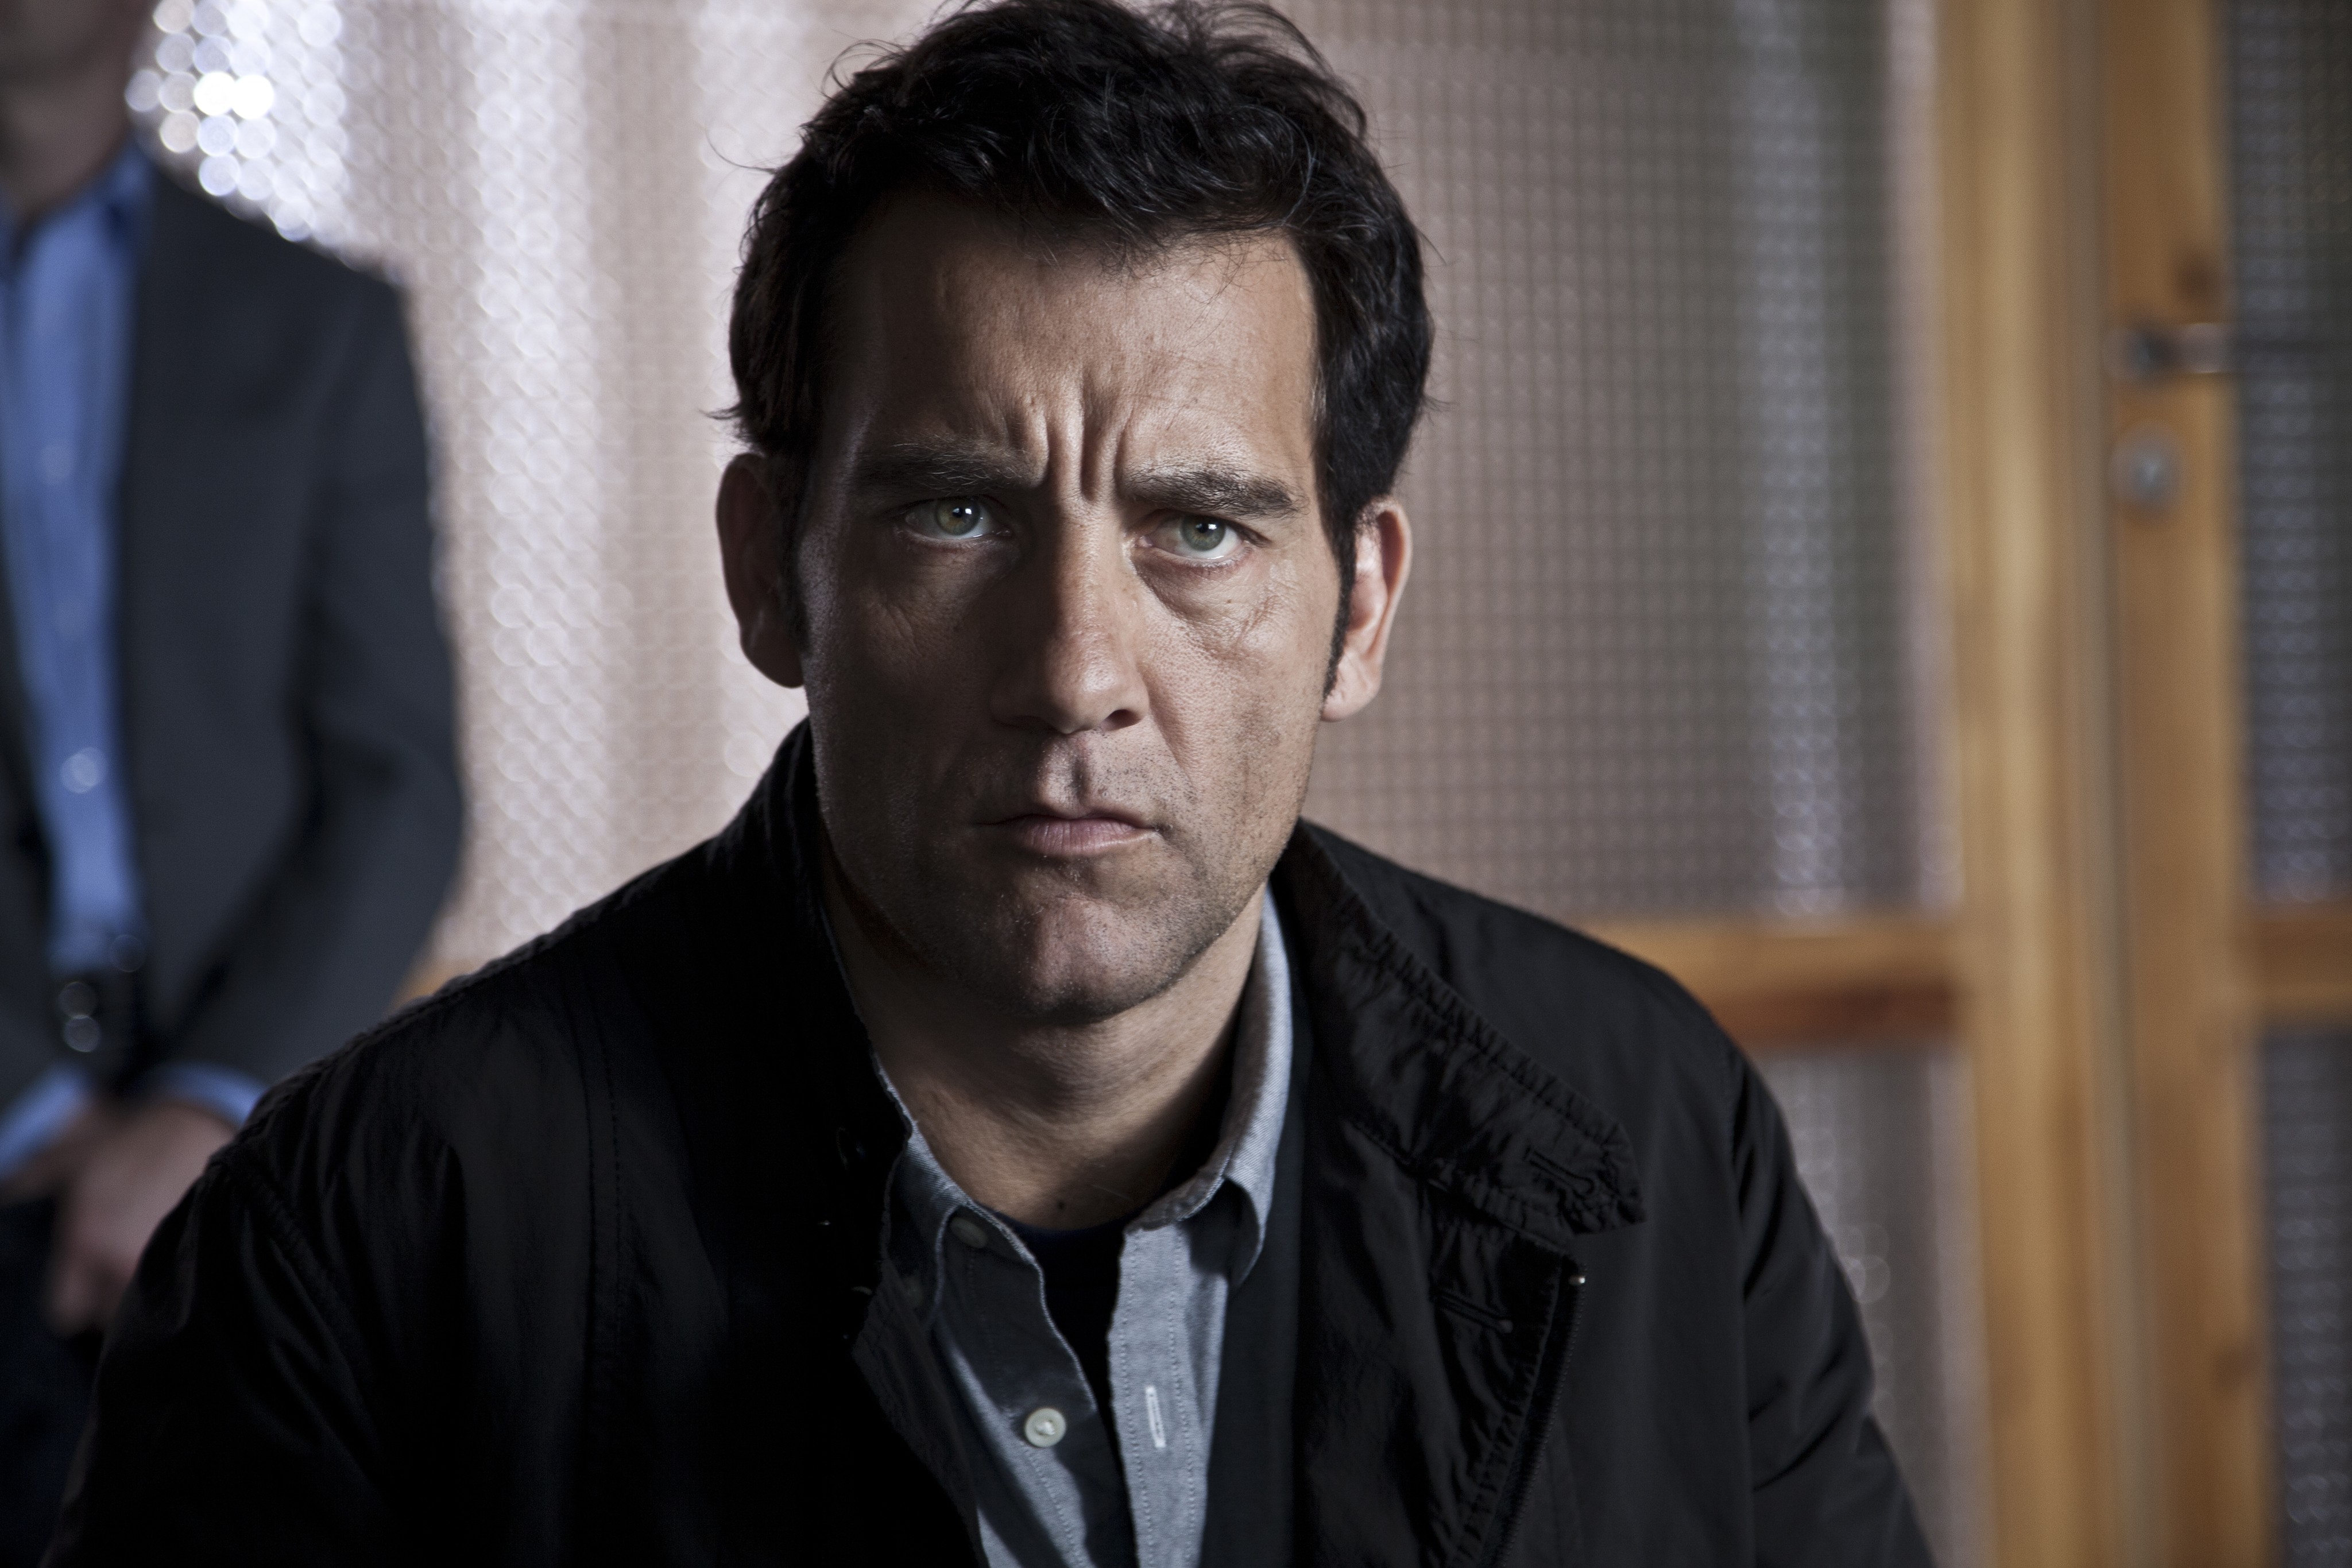 Intruders Trailer: Clive Owen's Not-So-American Horror Story